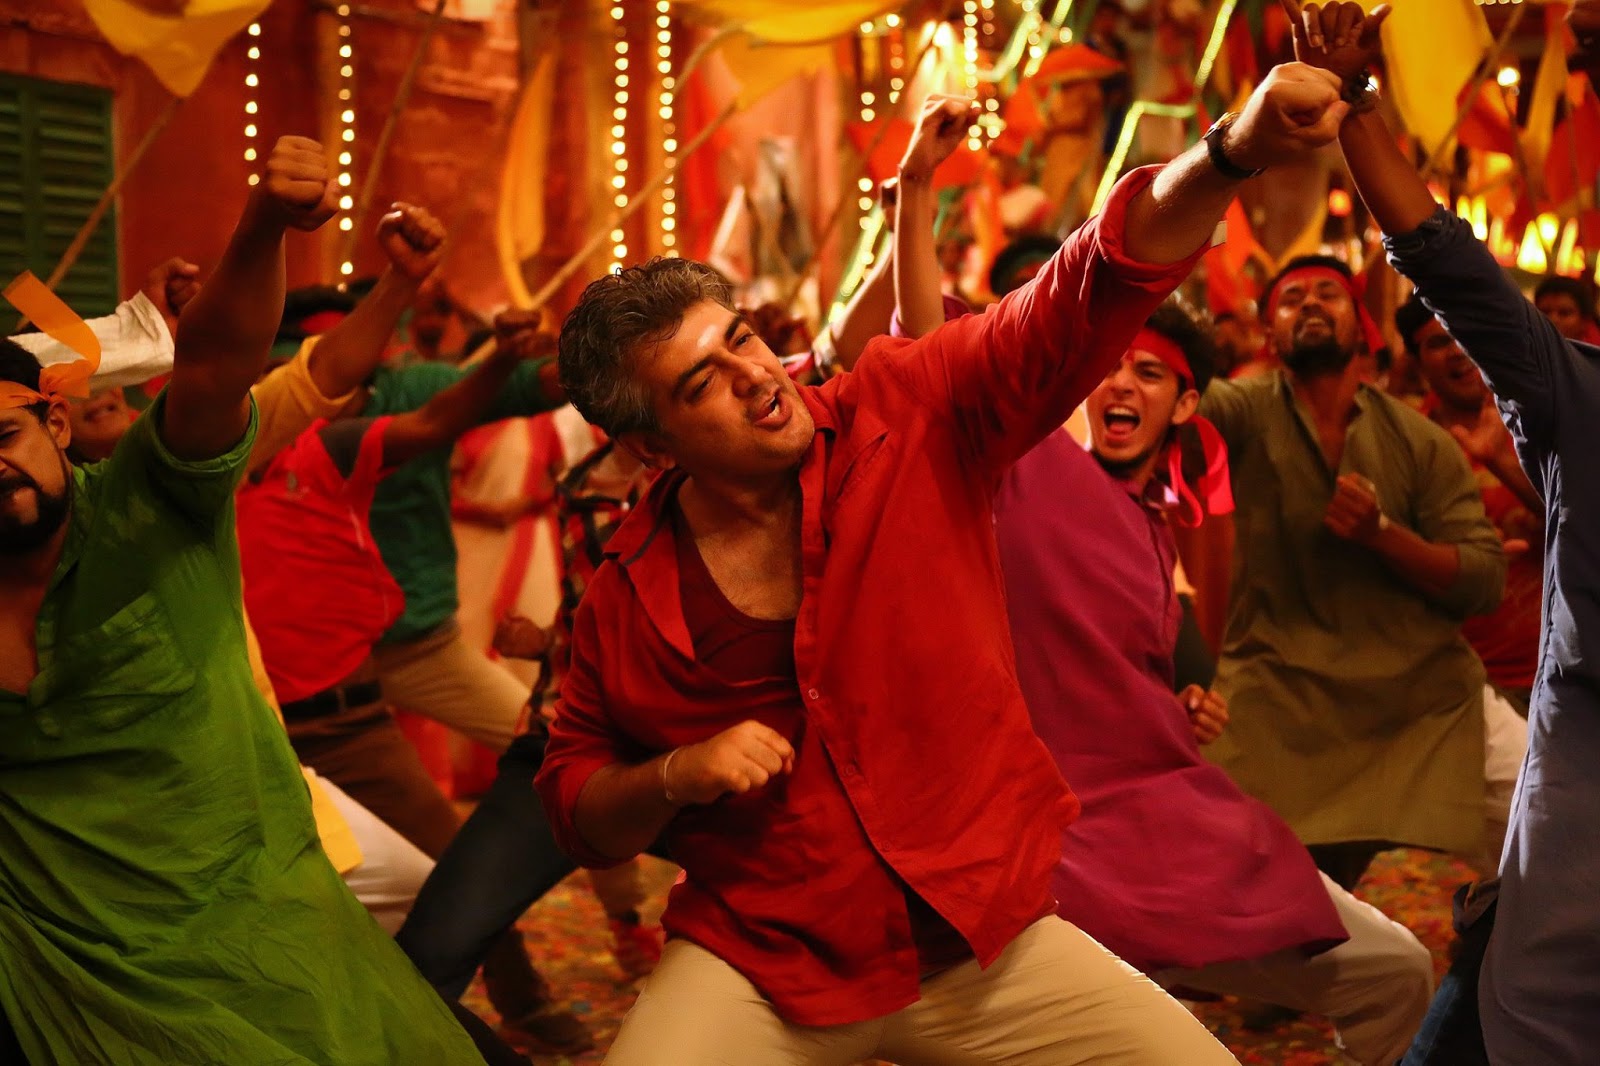 vedalam movie download in utorrent what does red